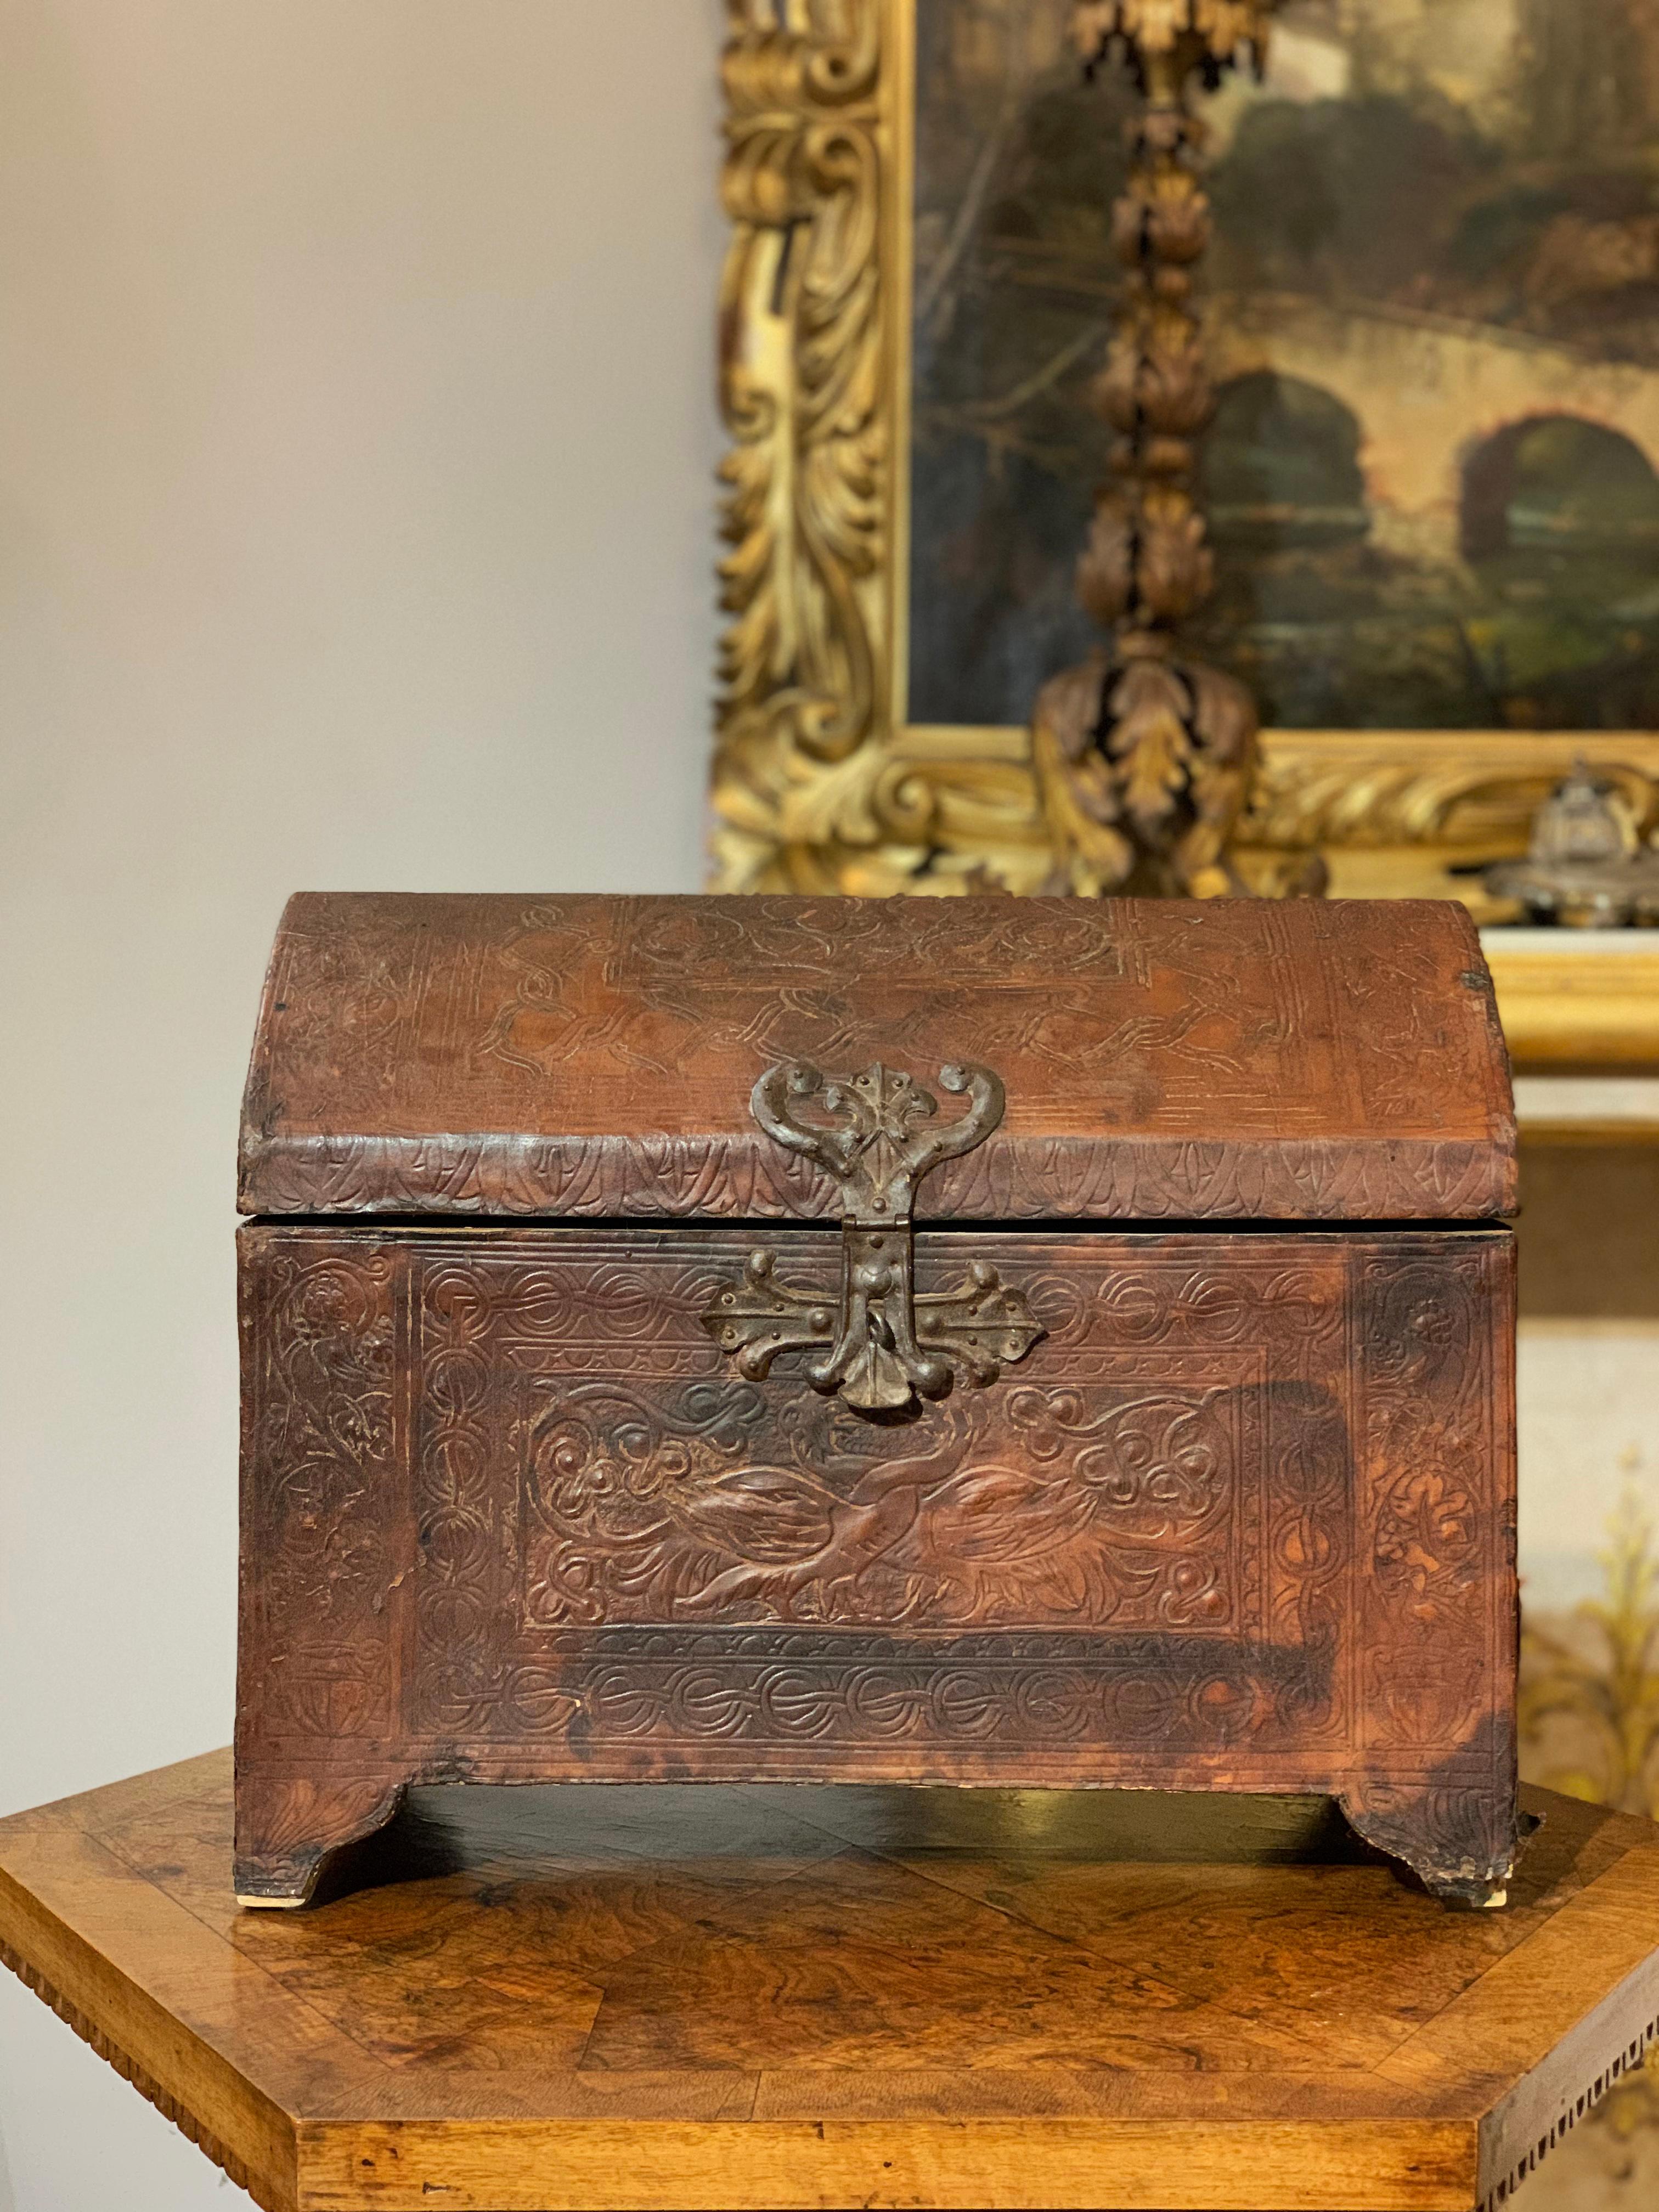 Particular little wooden candle holder case covered in fire-branded leather, with bronze hinges. The cassina features floral and gemometric decorations that create boxes within which zoomorphic images are depicted such as two intertwining peacocks